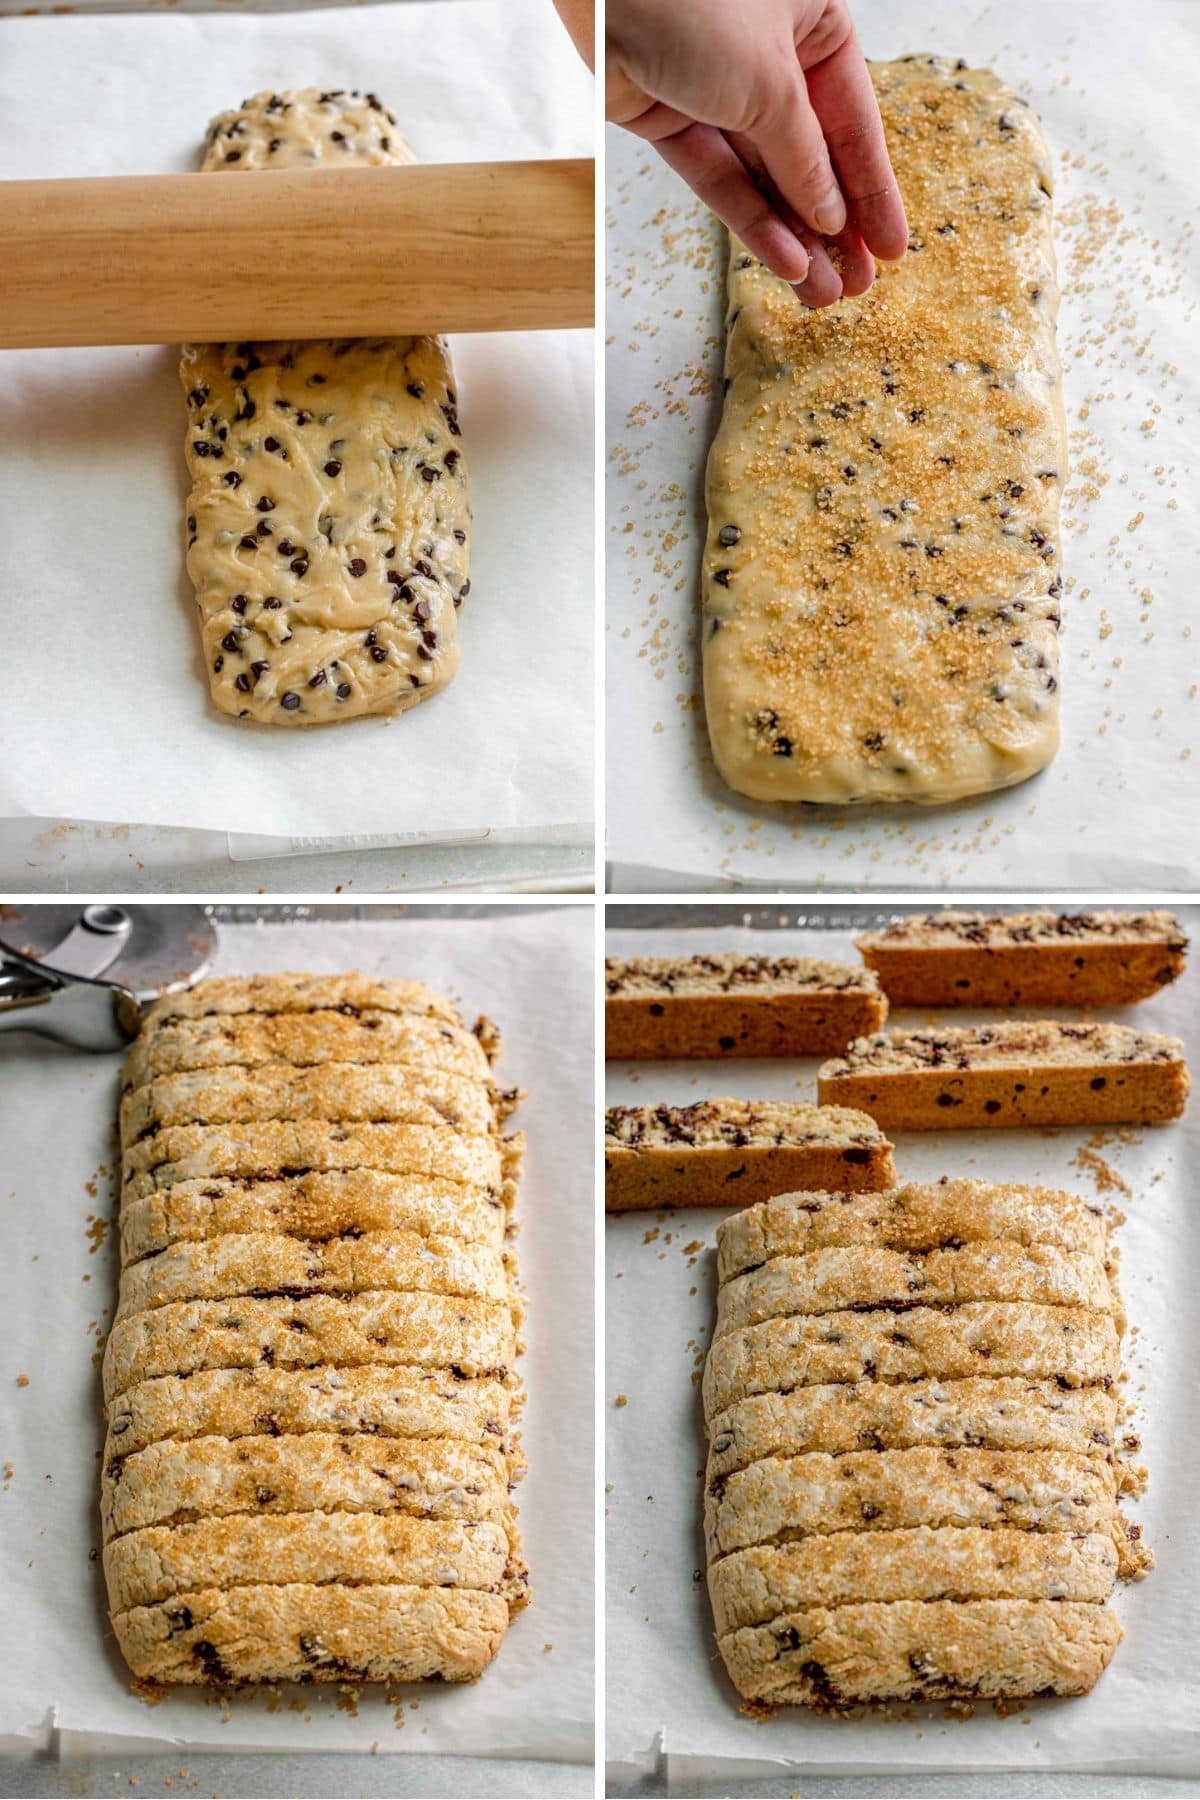 Chocolate Chip Biscotti preparation collage rolling out dough and baking